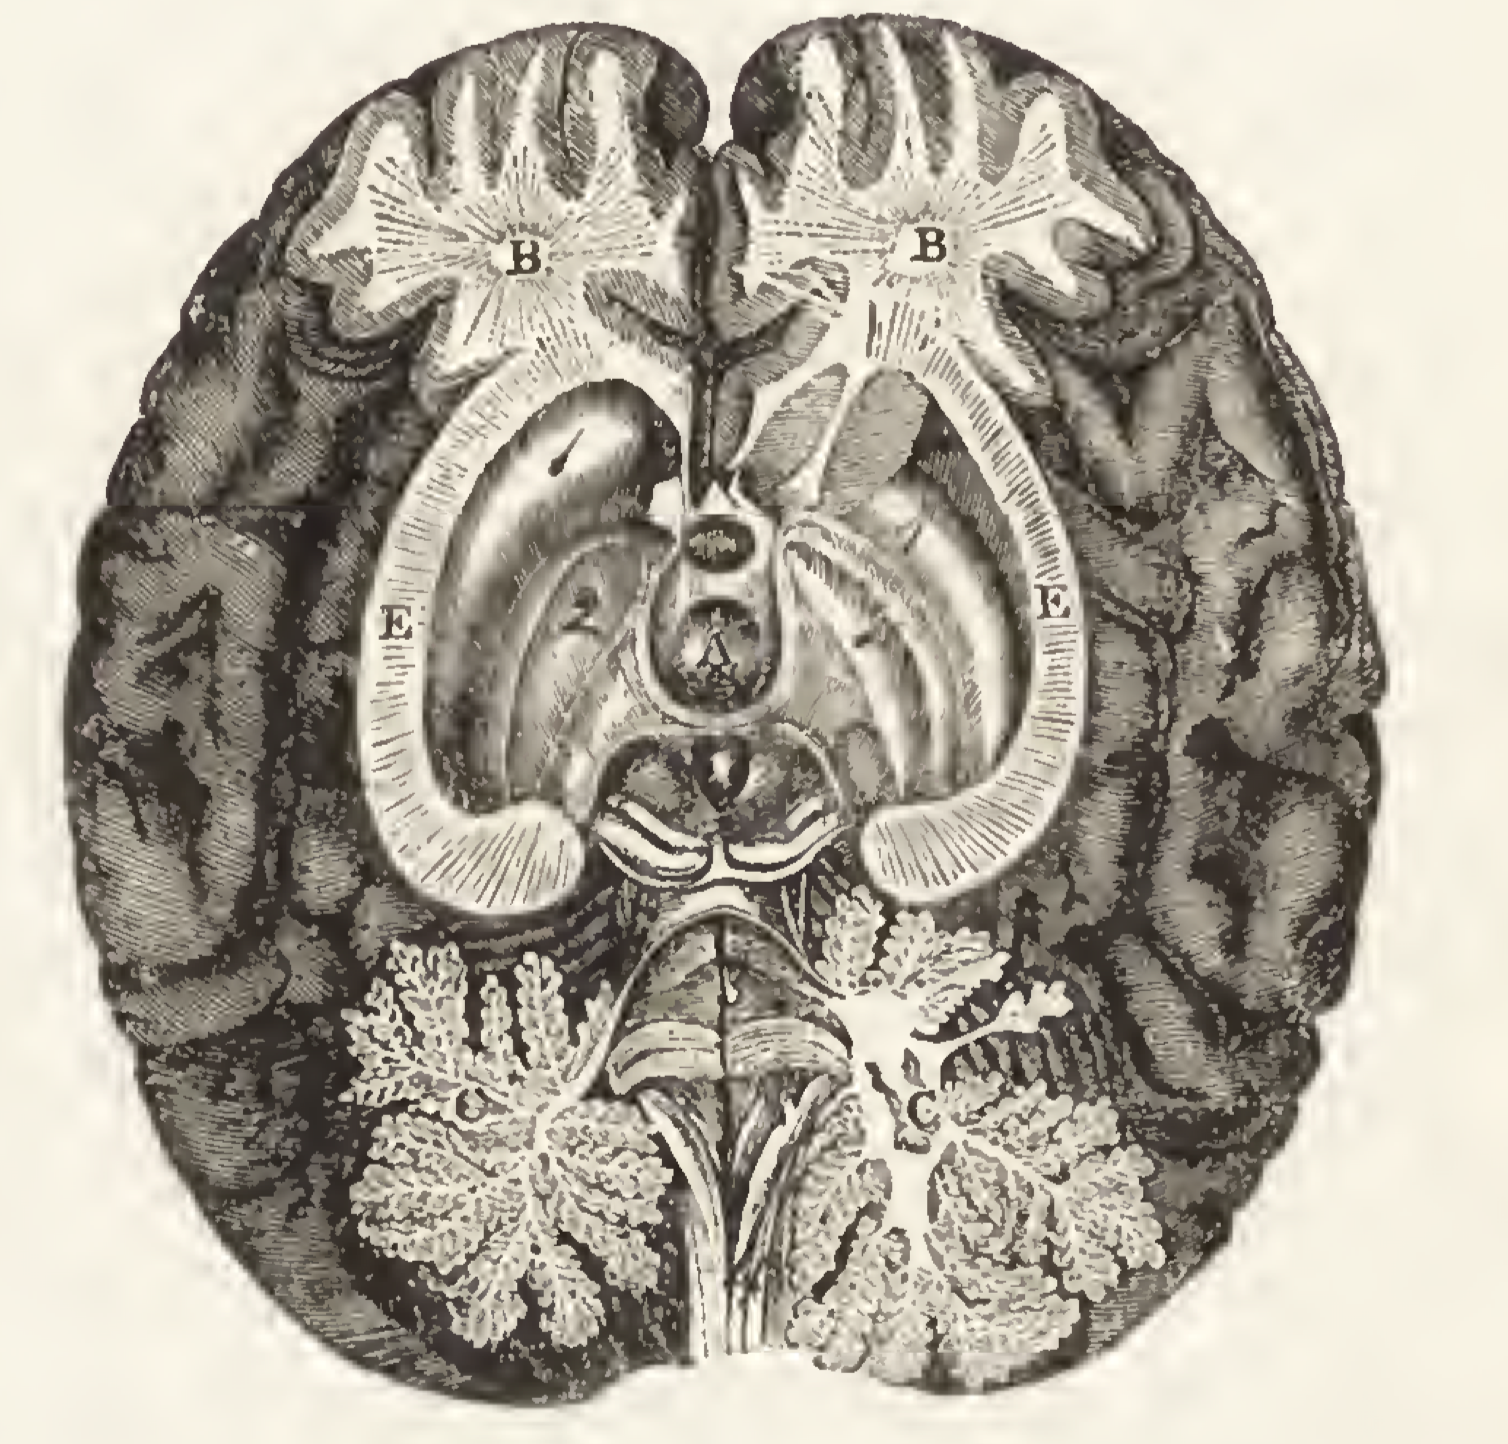 Black-and-white illustration of cross-section of brain.